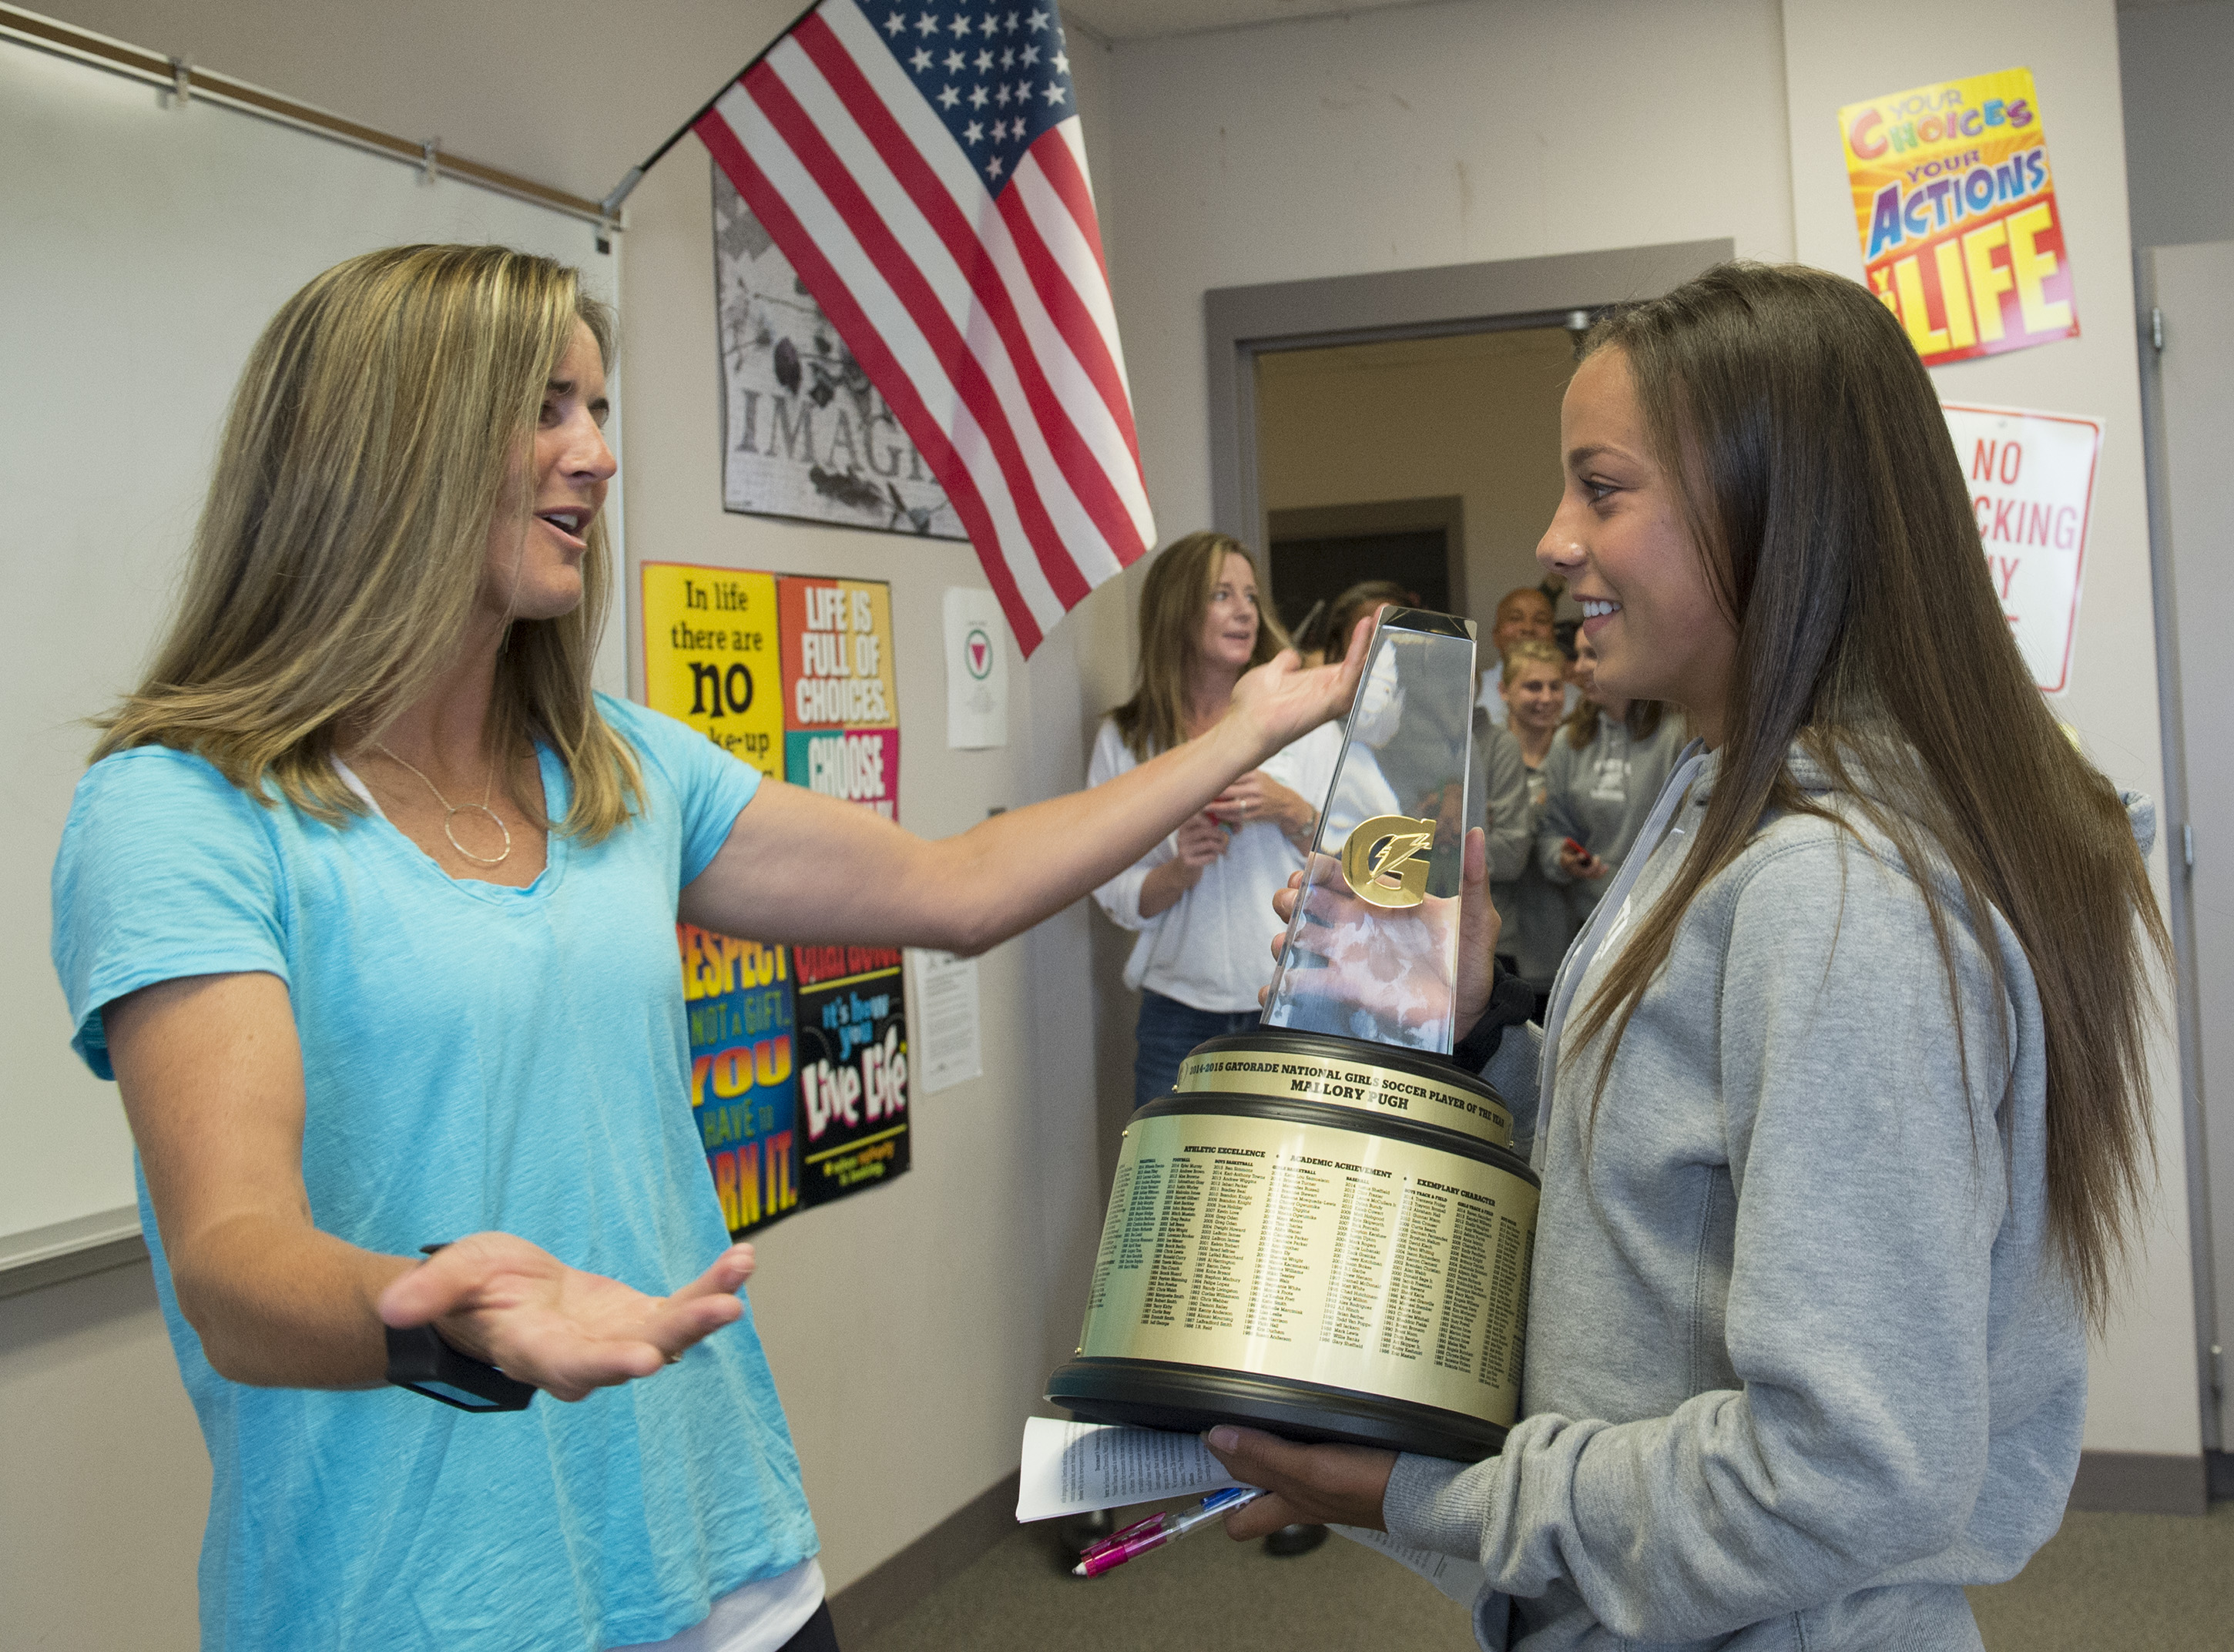 Mallory Pugh, right, of Mountain Vista High School, is surprised with the 2014-15 Gatorade National Girls Soccer Player of the Year trophy by Gold Medalist and World Cup Champion Brandi Chastain, Thursday, May 21, 2015 in Highlands Ranch, Colo. The award recognizes outstanding athletic excellence as well as high standards of academic achievement and exemplary character demonstrated on and off the field. Photo/Gatorade, Susan Goldman, handout.